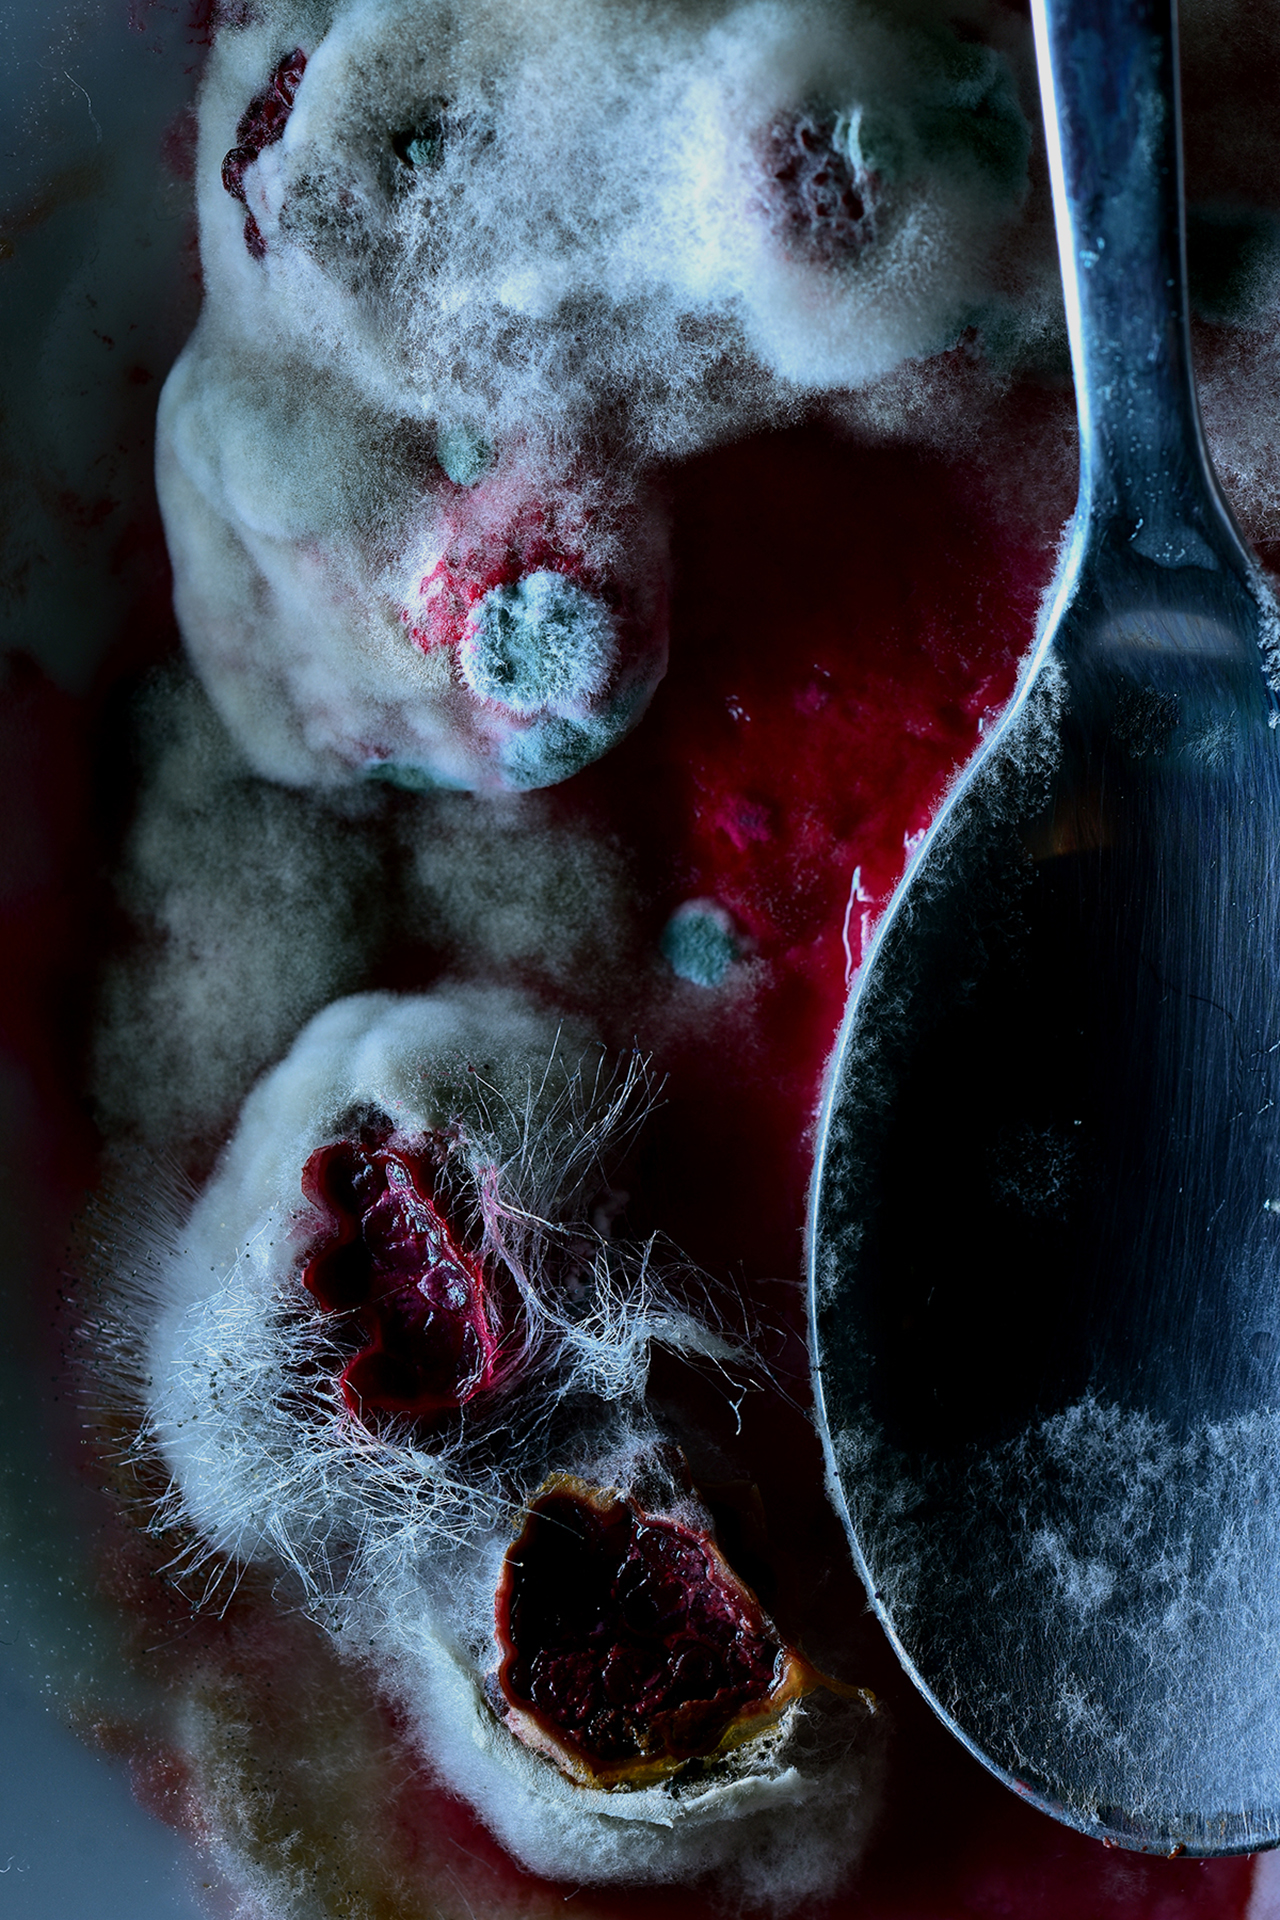 Macro shots of mouldy meals, exploring the inner beauty of mould.